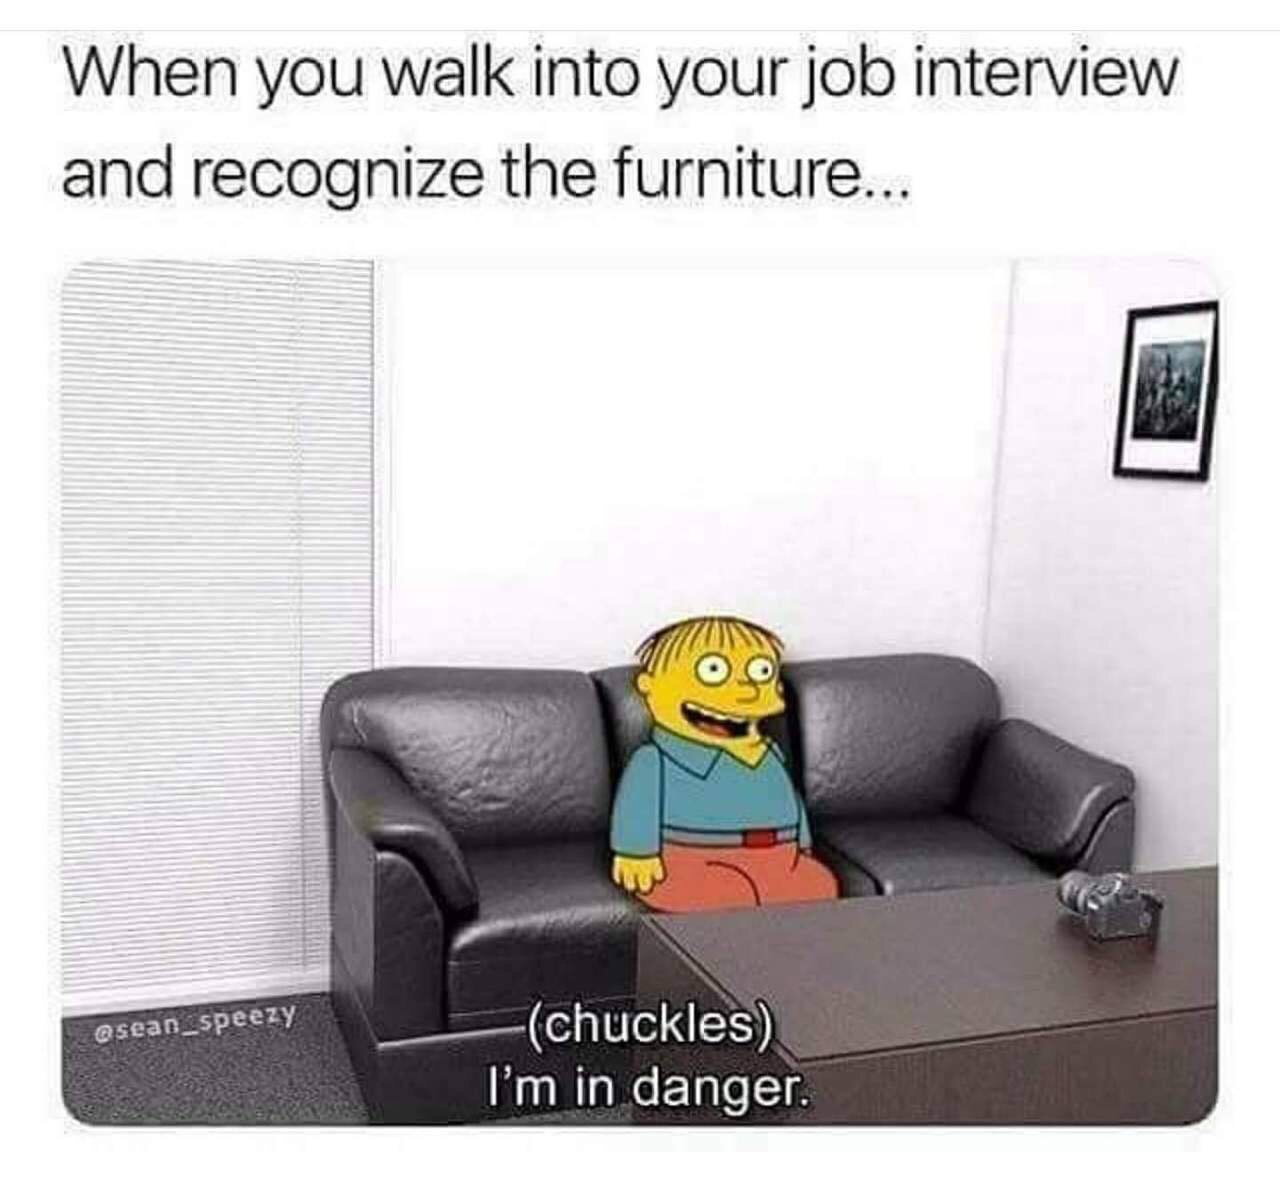 When you walk into your job interview and recognize the furniture... speezy chuckles I'm in danger.